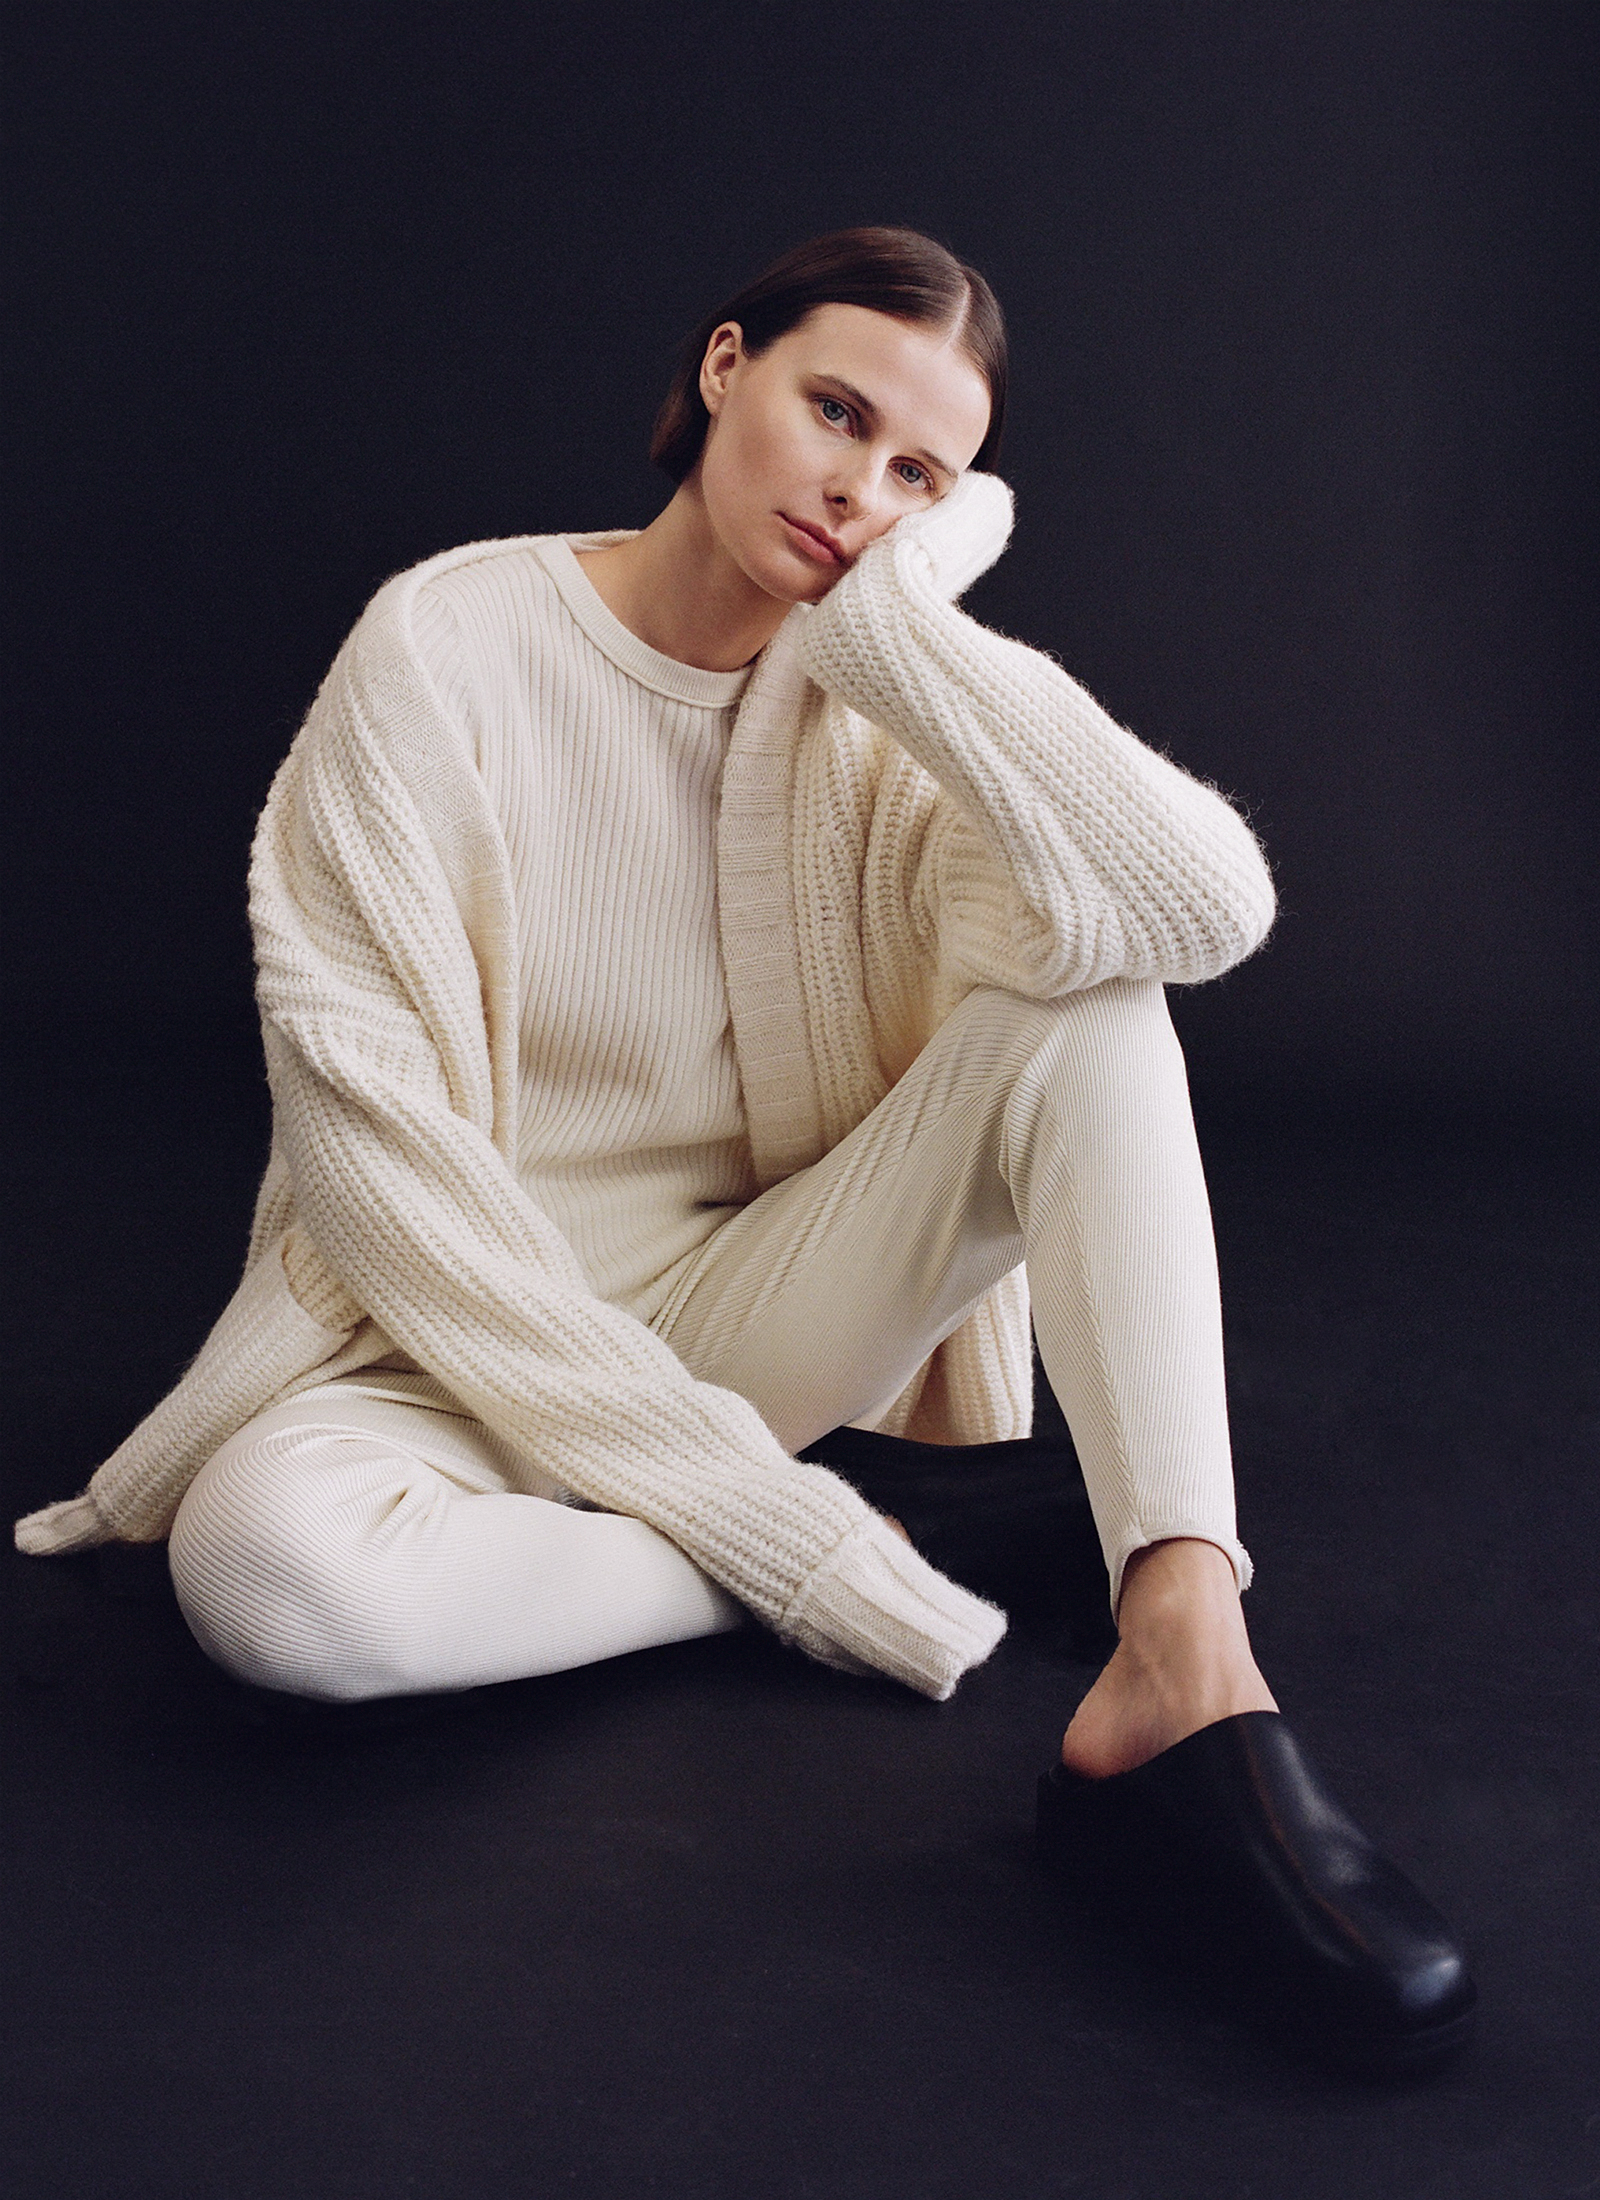 Shawl Collar Cardigan in Wool Cashmere - Ivory - by Zoe Gherter for Co